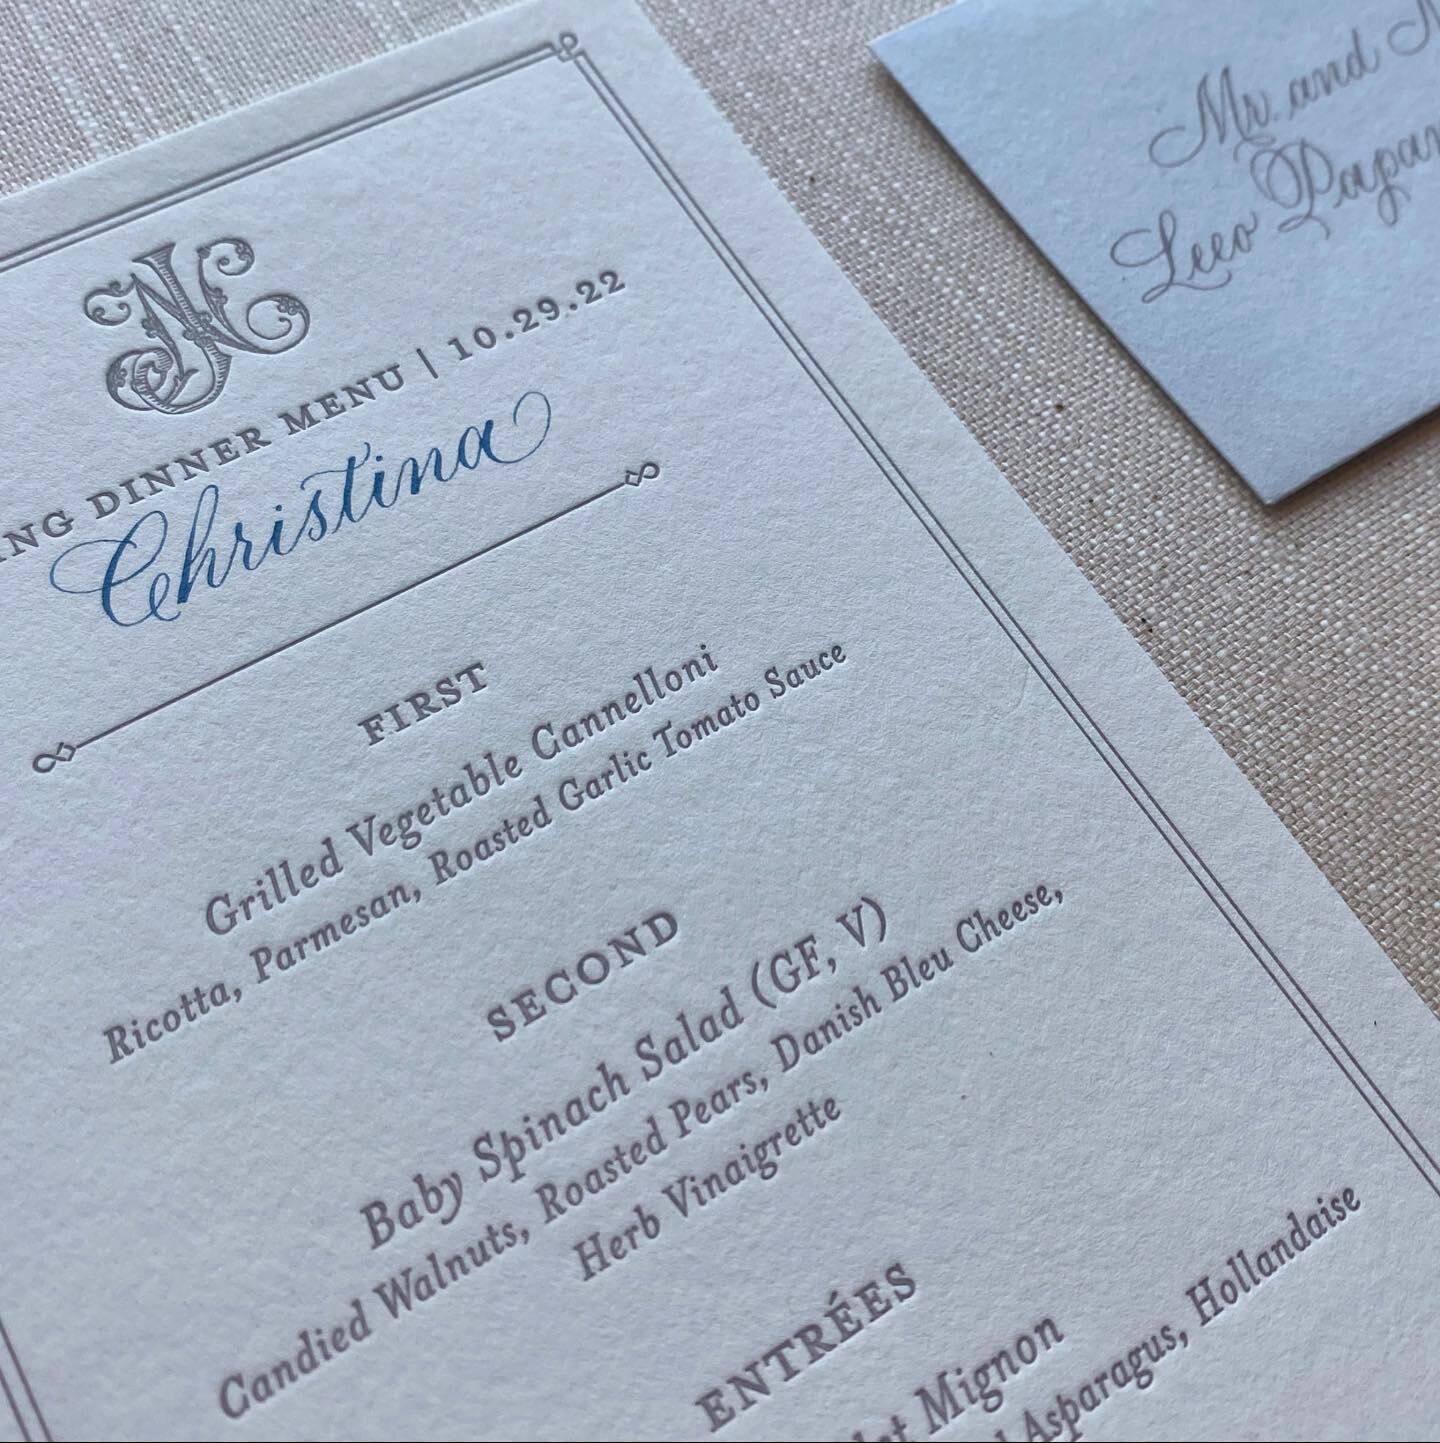 Elegant details 💙 Personalized menus just might be my favorite item to letter these days!

Stationery design: @colorboxletterpress
Planning: @fabulousfete

#calligraphy #pointedpen #placecard #dallascalligrapher #dallasweddings